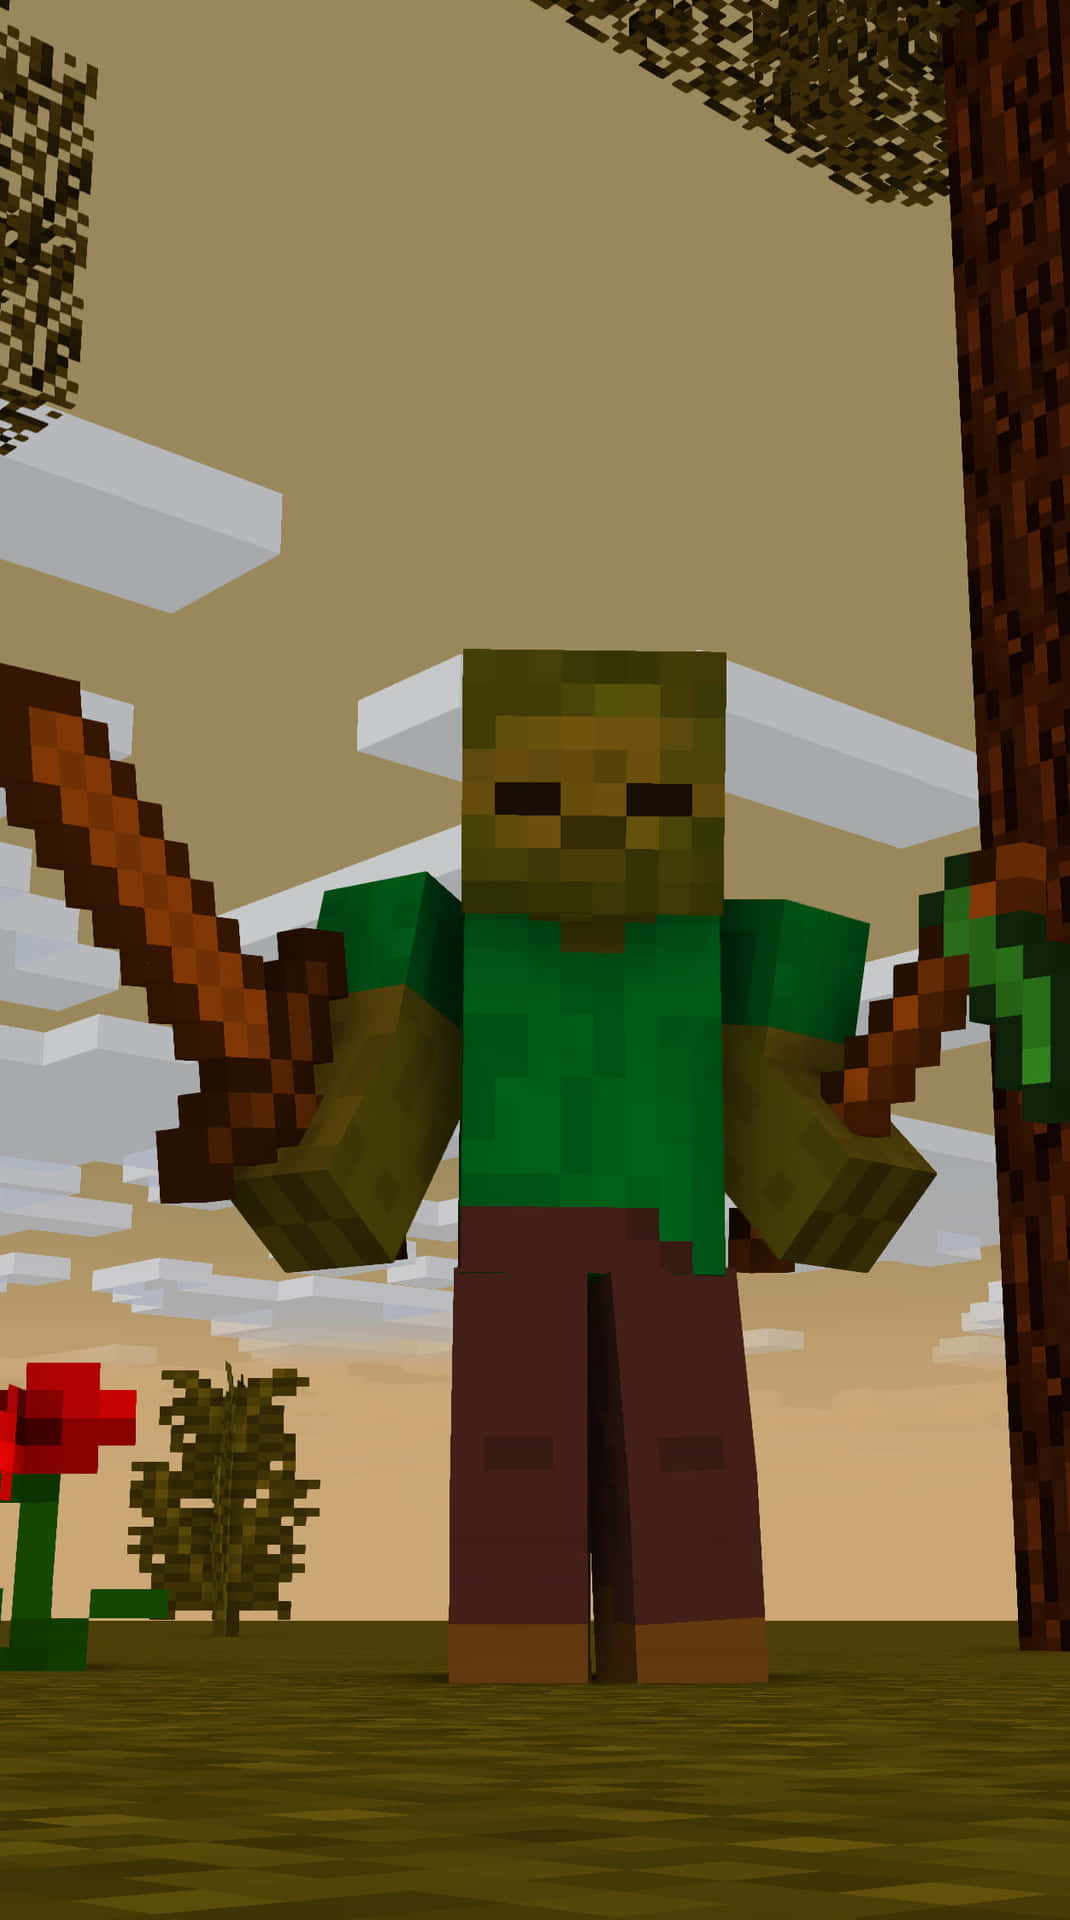 An Intense Encounter with a Minecraft Zombie Wallpaper